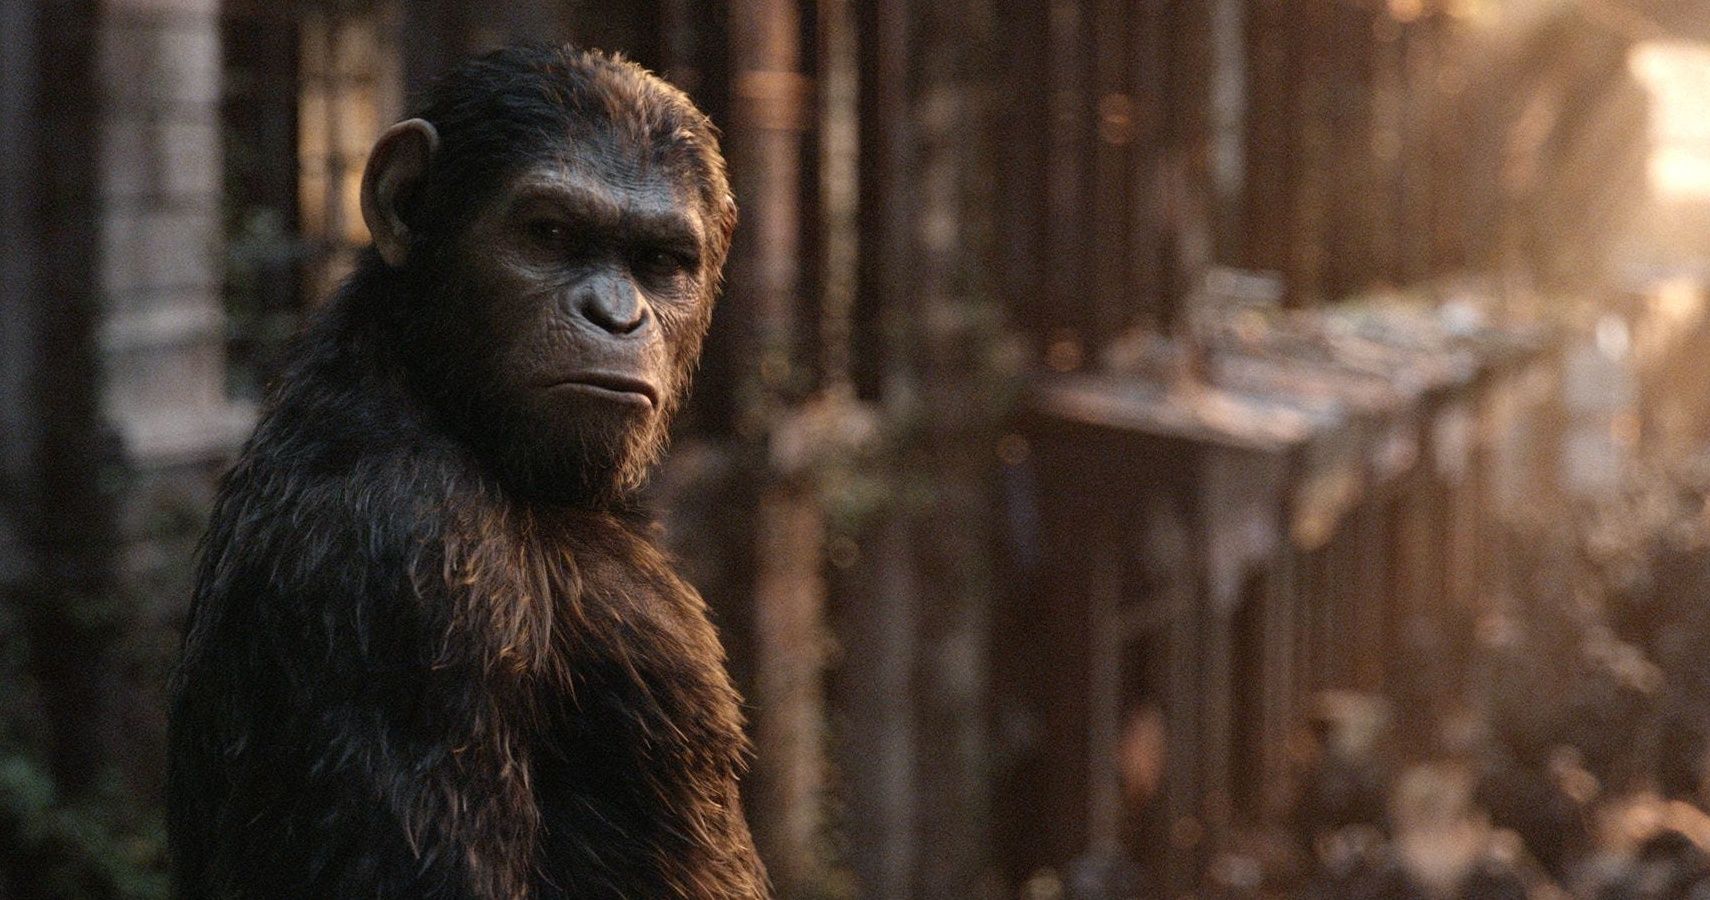 rise of the planet of the apes full movie free online